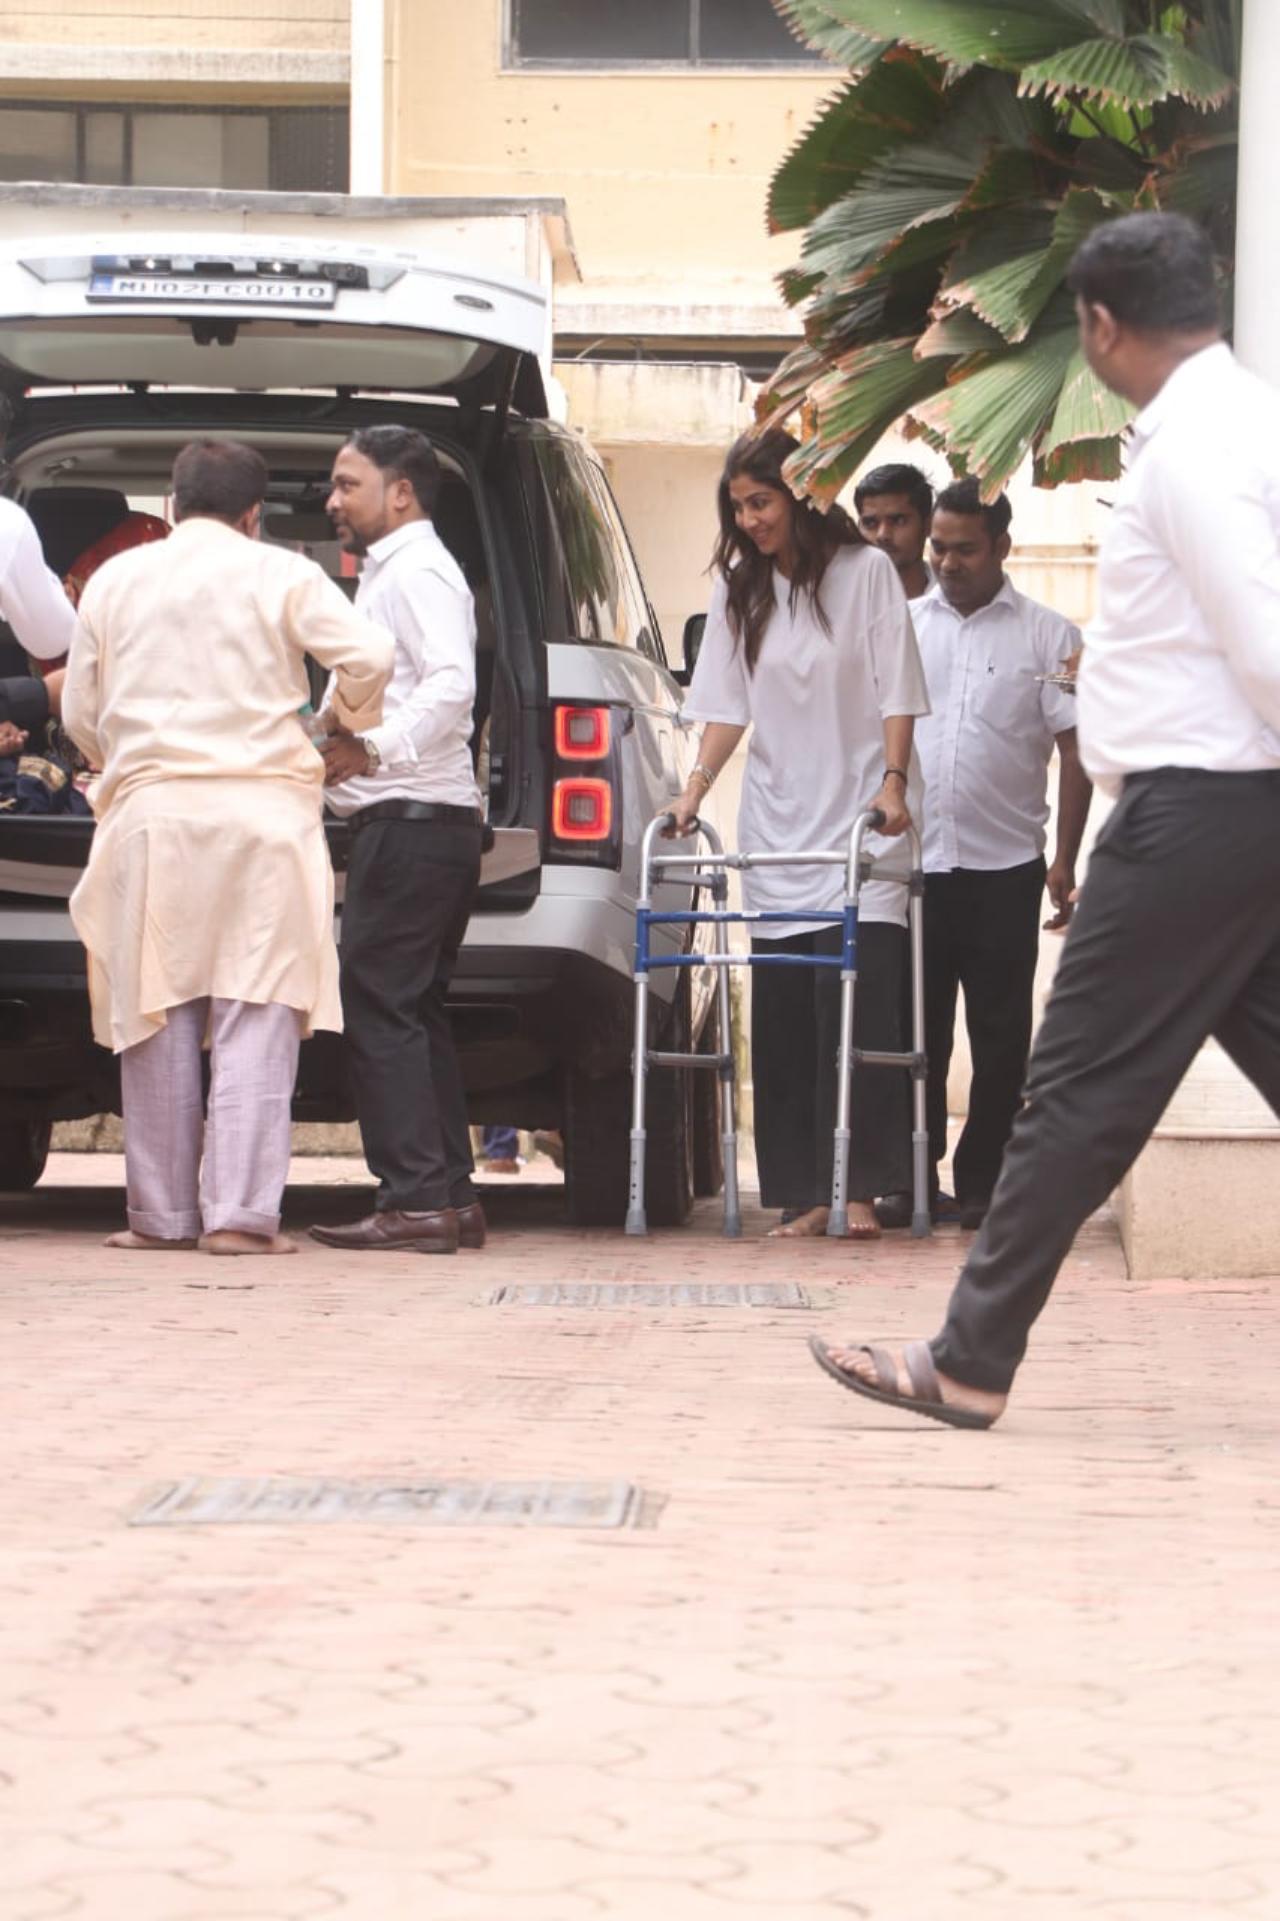 On Monday morning, Shilpa Shetty was seen outside her house ready to welcome Lord Ganesha to her home